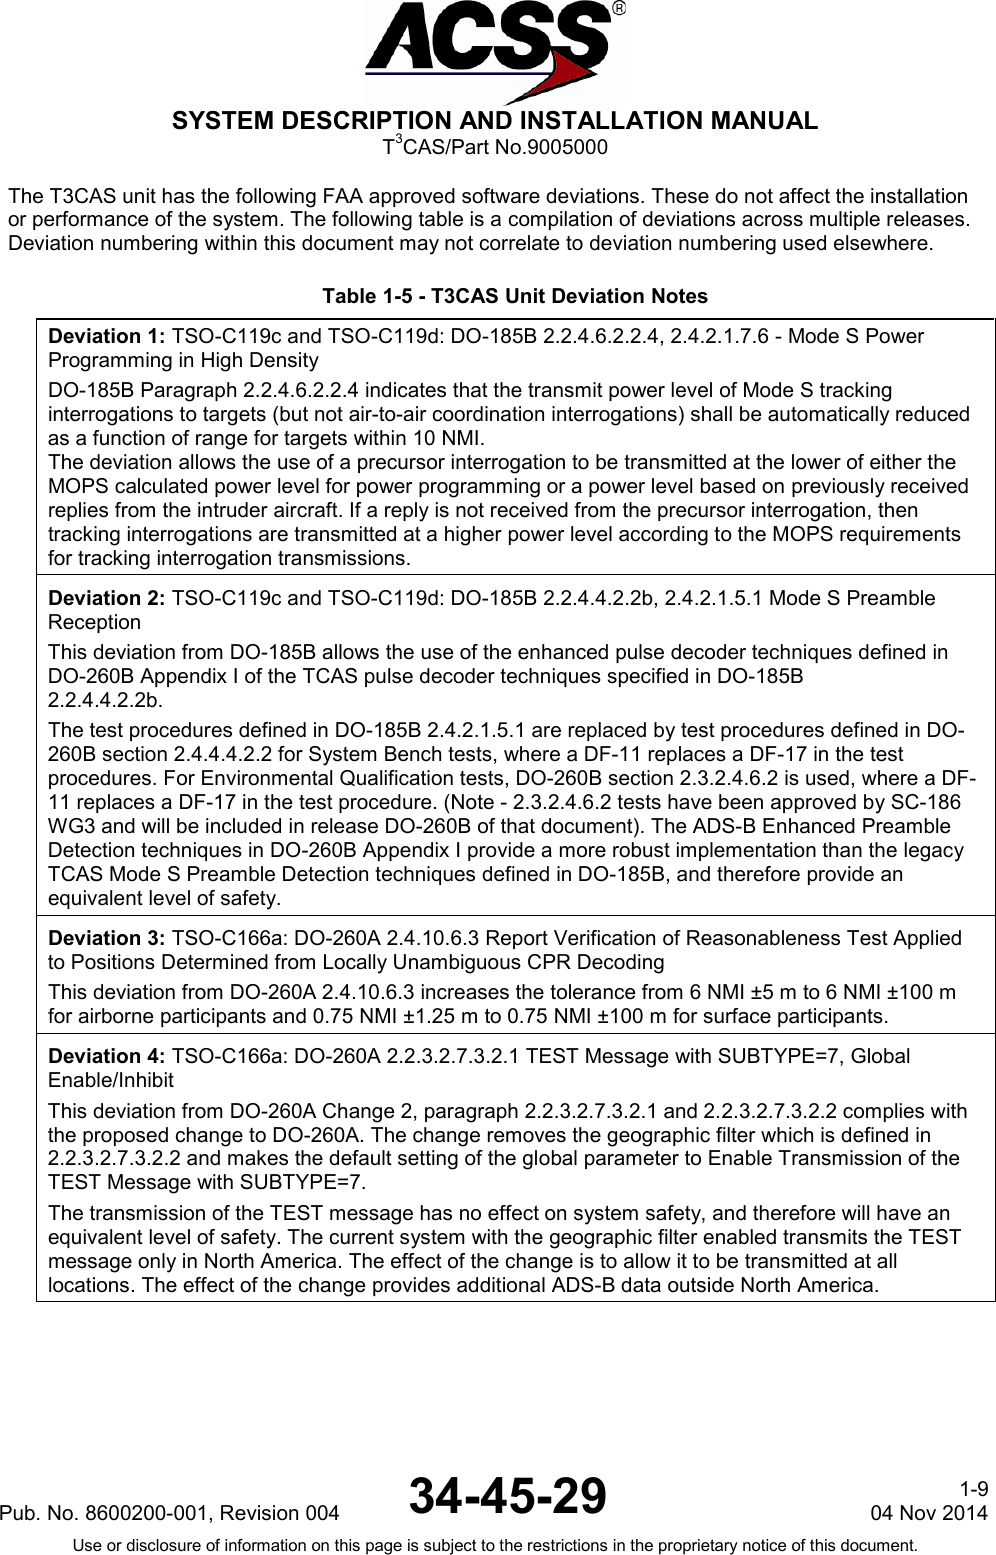  SYSTEM DESCRIPTION AND INSTALLATION MANUAL T3CAS/Part No.9005000 The T3CAS unit has the following FAA approved software deviations. These do not affect the installation or performance of the system. The following table is a compilation of deviations across multiple releases. Deviation numbering within this document may not correlate to deviation numbering used elsewhere.  Table 1-5 - T3CAS Unit Deviation Notes Deviation 1: TSO-C119c and TSO-C119d: DO-185B 2.2.4.6.2.2.4, 2.4.2.1.7.6 - Mode S Power Programming in High Density DO-185B Paragraph 2.2.4.6.2.2.4 indicates that the transmit power level of Mode S tracking interrogations to targets (but not air-to-air coordination interrogations) shall be automatically reduced as a function of range for targets within 10 NMI. The deviation allows the use of a precursor interrogation to be transmitted at the lower of either the MOPS calculated power level for power programming or a power level based on previously received replies from the intruder aircraft. If a reply is not received from the precursor interrogation, then tracking interrogations are transmitted at a higher power level according to the MOPS requirements for tracking interrogation transmissions.  Deviation 2: TSO-C119c and TSO-C119d: DO-185B 2.2.4.4.2.2b, 2.4.2.1.5.1 Mode S Preamble Reception This deviation from DO-185B allows the use of the enhanced pulse decoder techniques defined in DO-260B Appendix I of the TCAS pulse decoder techniques specified in DO-185B 2.2.4.4.2.2b. The test procedures defined in DO-185B 2.4.2.1.5.1 are replaced by test procedures defined in DO-260B section 2.4.4.4.2.2 for System Bench tests, where a DF-11 replaces a DF-17 in the test procedures. For Environmental Qualification tests, DO-260B section 2.3.2.4.6.2 is used, where a DF-11 replaces a DF-17 in the test procedure. (Note - 2.3.2.4.6.2 tests have been approved by SC-186 WG3 and will be included in release DO-260B of that document). The ADS-B Enhanced Preamble Detection techniques in DO-260B Appendix I provide a more robust implementation than the legacy TCAS Mode S Preamble Detection techniques defined in DO-185B, and therefore provide an equivalent level of safety. Deviation 3: TSO-C166a: DO-260A 2.4.10.6.3 Report Verification of Reasonableness Test Applied to Positions Determined from Locally Unambiguous CPR Decoding This deviation from DO-260A 2.4.10.6.3 increases the tolerance from 6 NMI ±5 m to 6 NMI ±100 m for airborne participants and 0.75 NMI ±1.25 m to 0.75 NMI ±100 m for surface participants. Deviation 4: TSO-C166a: DO-260A 2.2.3.2.7.3.2.1 TEST Message with SUBTYPE=7, Global Enable/Inhibit This deviation from DO-260A Change 2, paragraph 2.2.3.2.7.3.2.1 and 2.2.3.2.7.3.2.2 complies with the proposed change to DO-260A. The change removes the geographic filter which is defined in 2.2.3.2.7.3.2.2 and makes the default setting of the global parameter to Enable Transmission of the TEST Message with SUBTYPE=7. The transmission of the TEST message has no effect on system safety, and therefore will have an equivalent level of safety. The current system with the geographic filter enabled transmits the TEST message only in North America. The effect of the change is to allow it to be transmitted at all locations. The effect of the change provides additional ADS-B data outside North America. Pub. No. 8600200-001, Revision 004 34-45-29 1-9 04 Nov 2014 Use or disclosure of information on this page is subject to the restrictions in the proprietary notice of this document.  